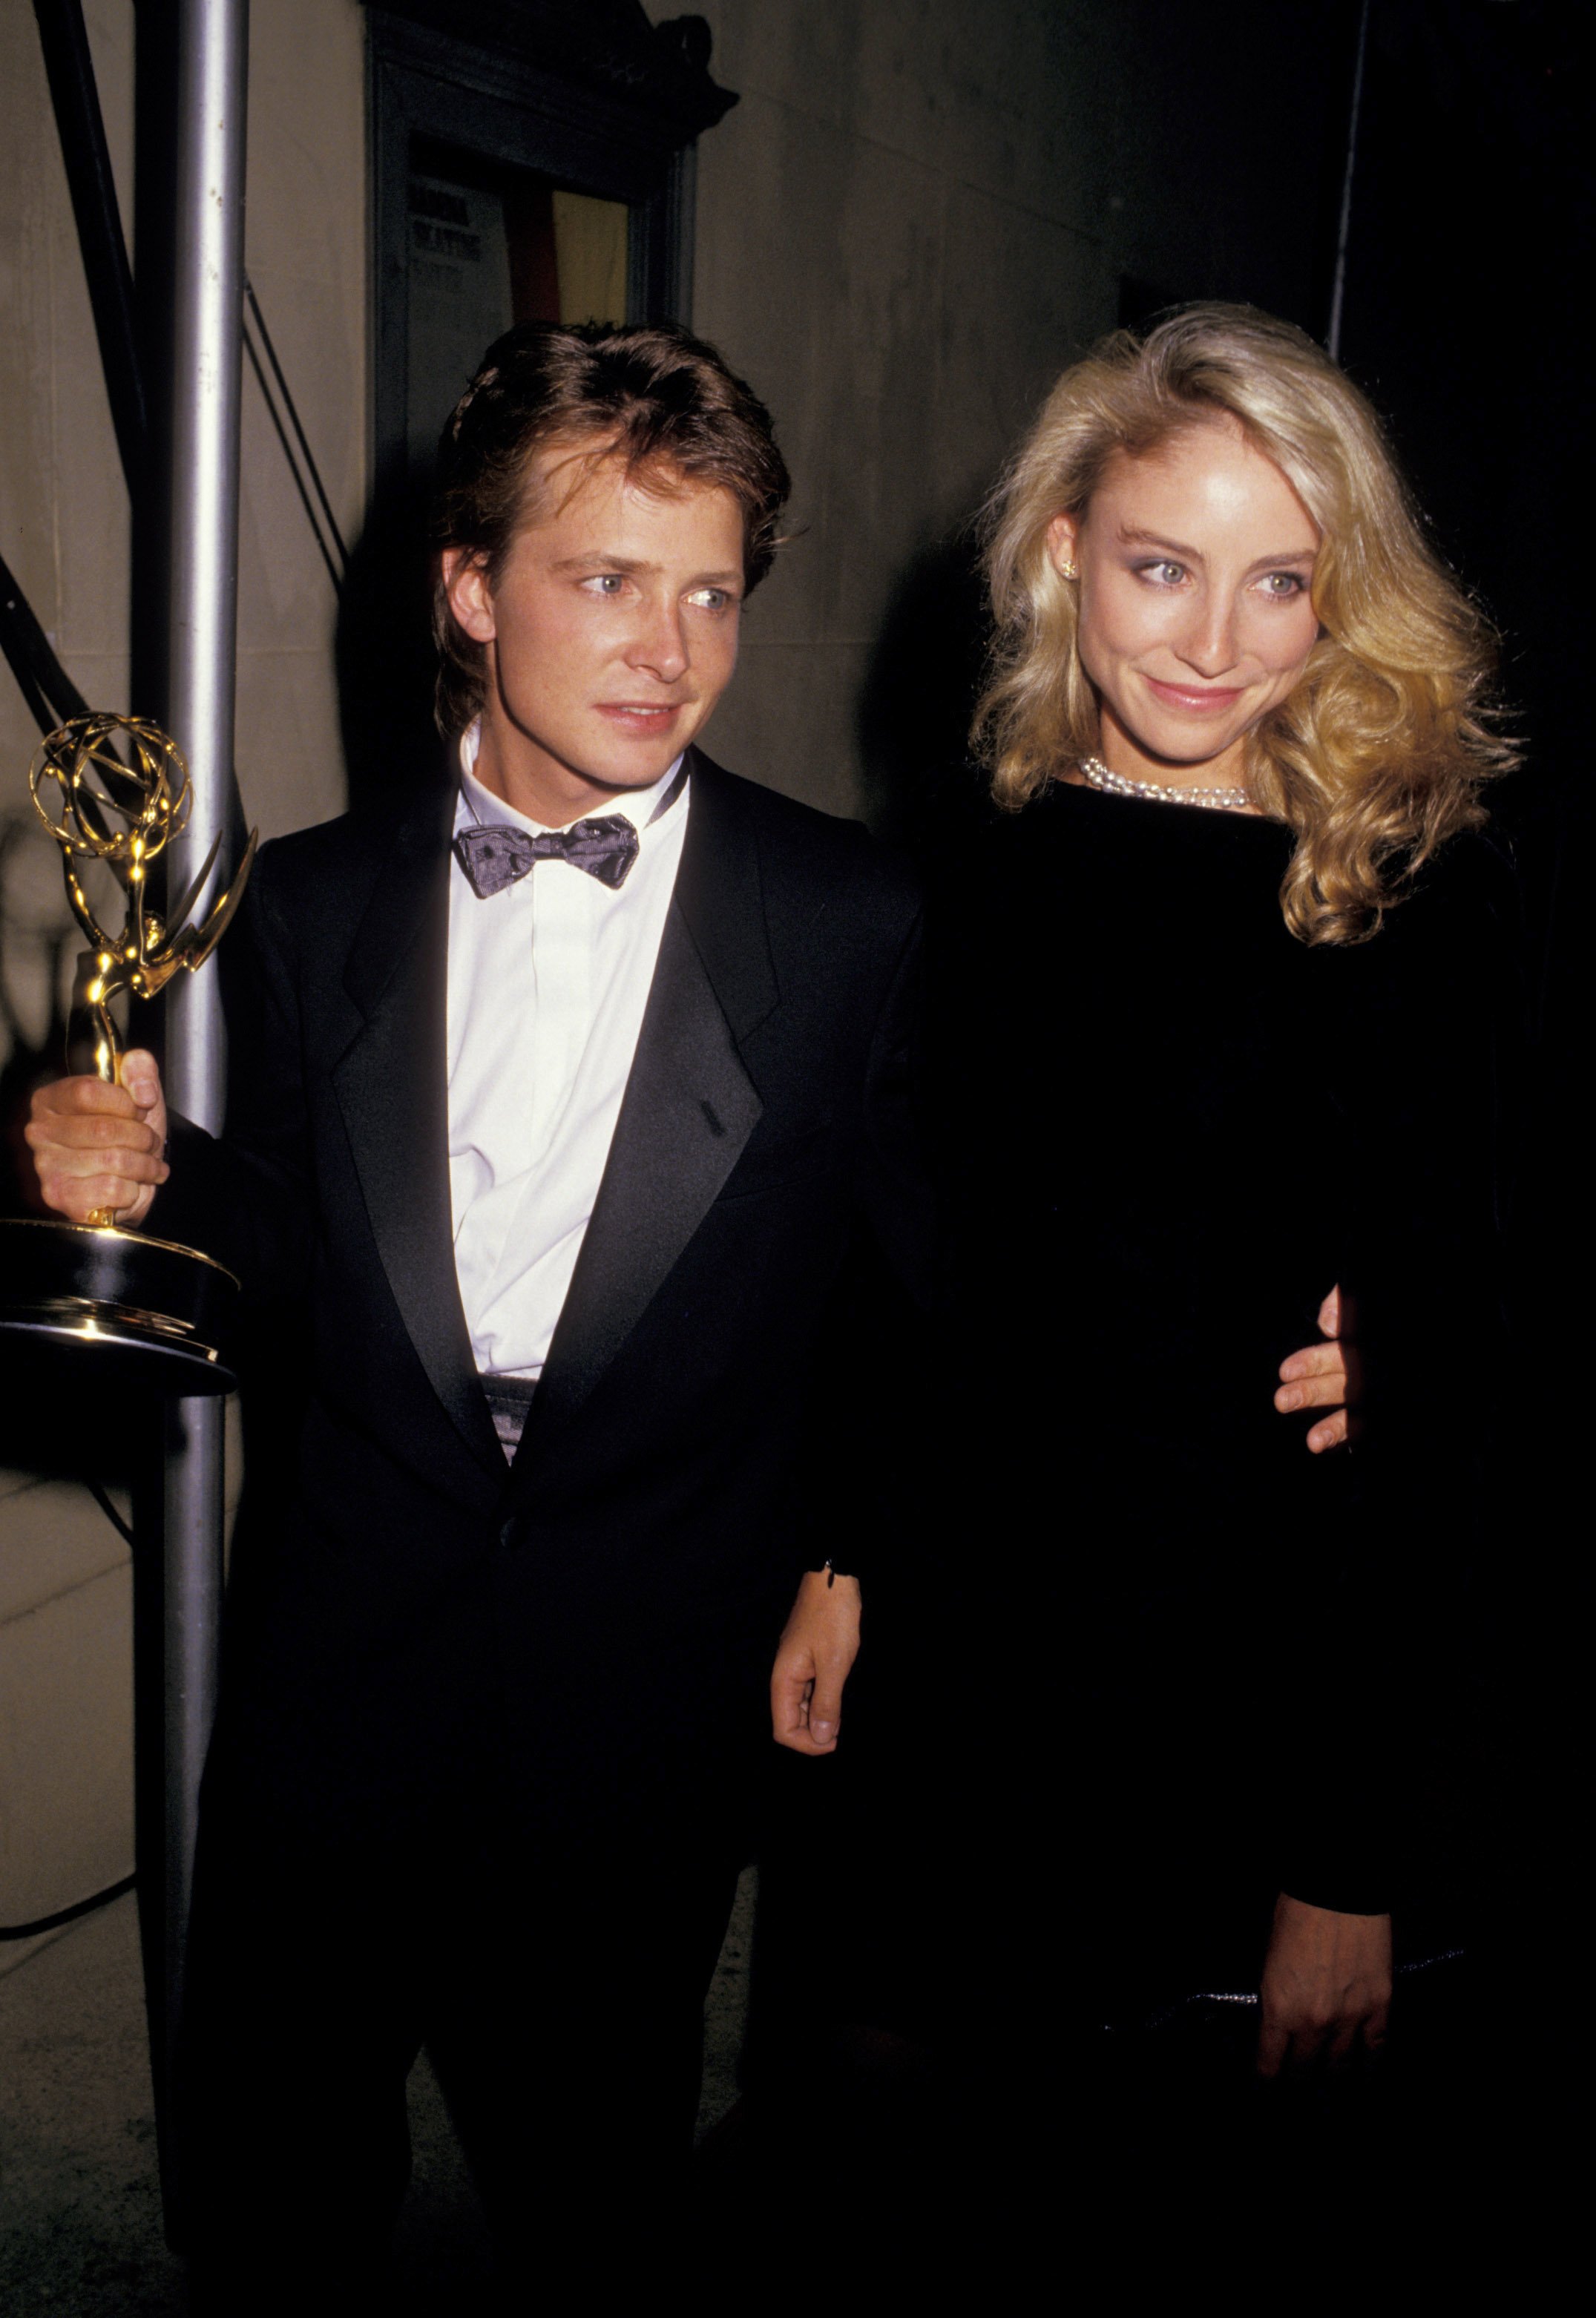 Michael J. Fox and wife Tracy Pollan at the 39th Annual Emmy Awards on September 20, 1987. / Source: Getty Images